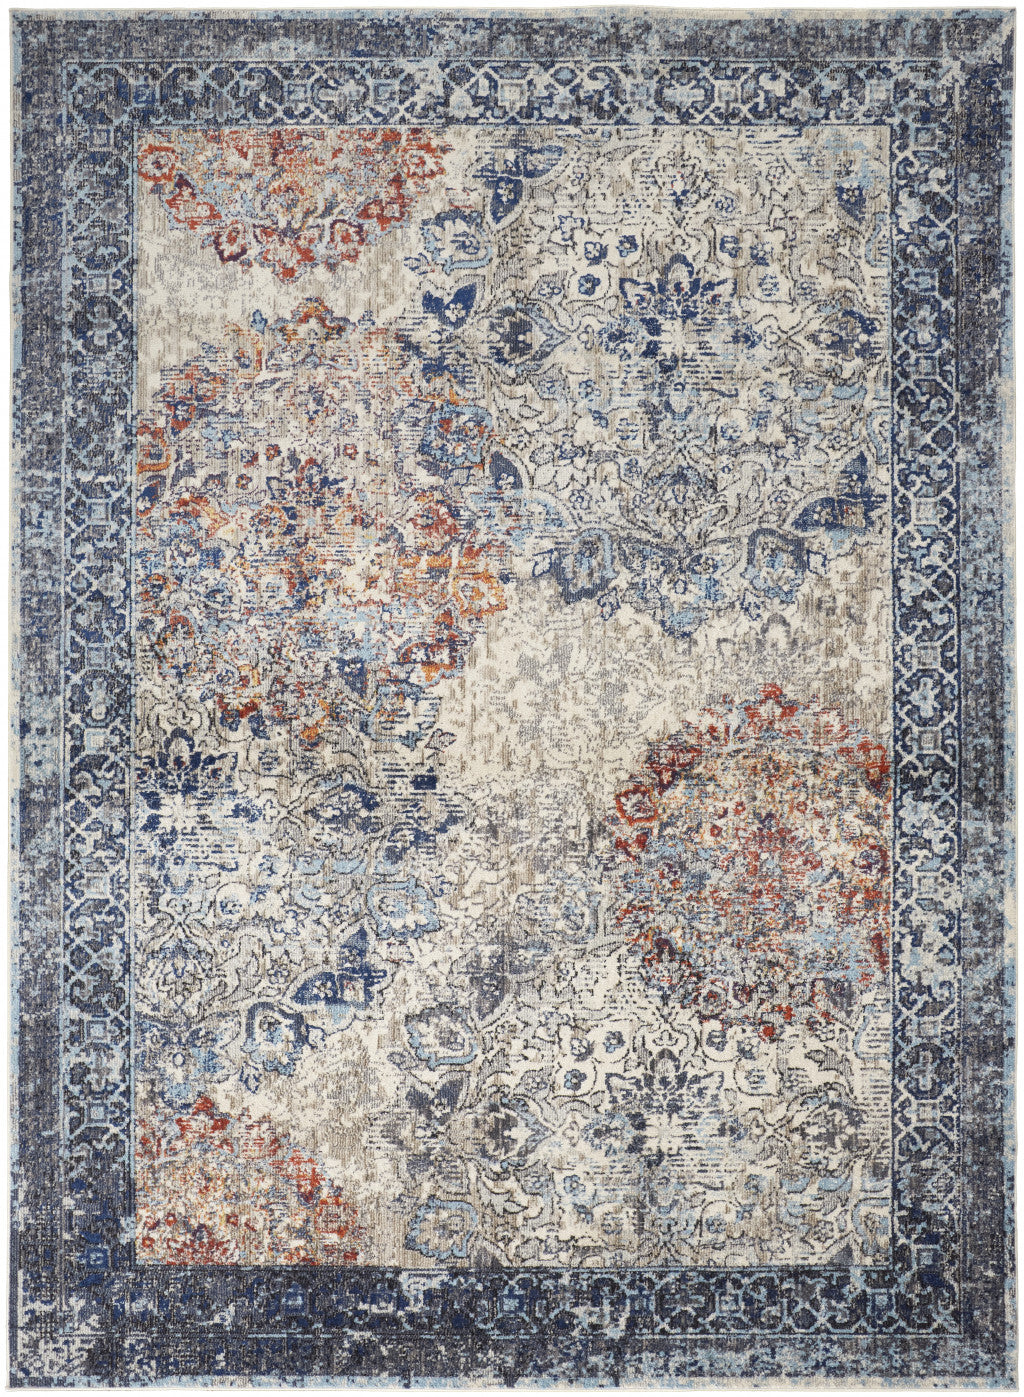 5' X 8' Blue Ivory And Red Floral Power Loom Distressed Stain Resistant Area Rug